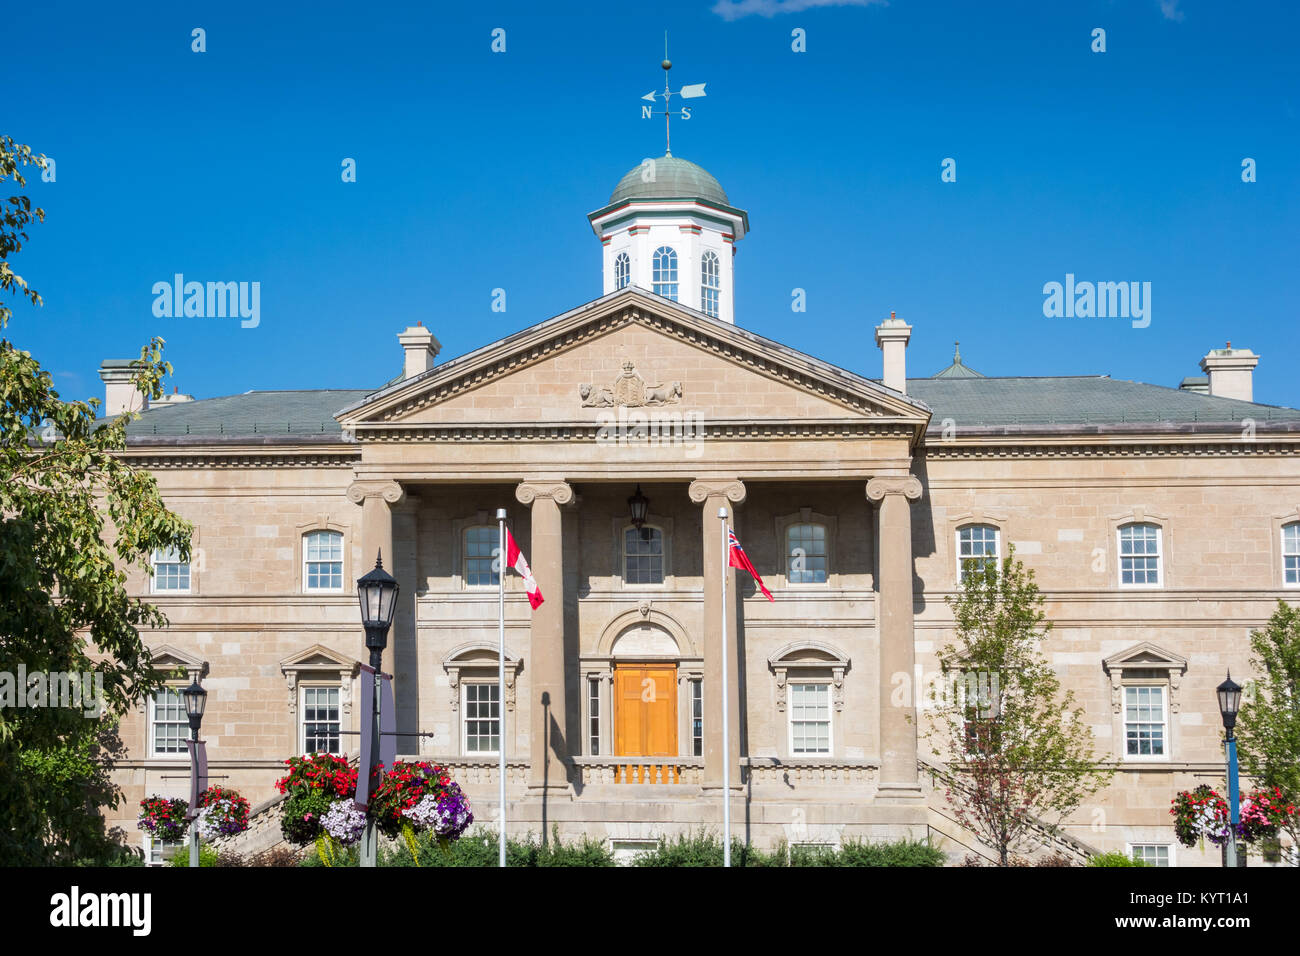 Courthouse in the town of Welland Ontario Canada Stock Photo